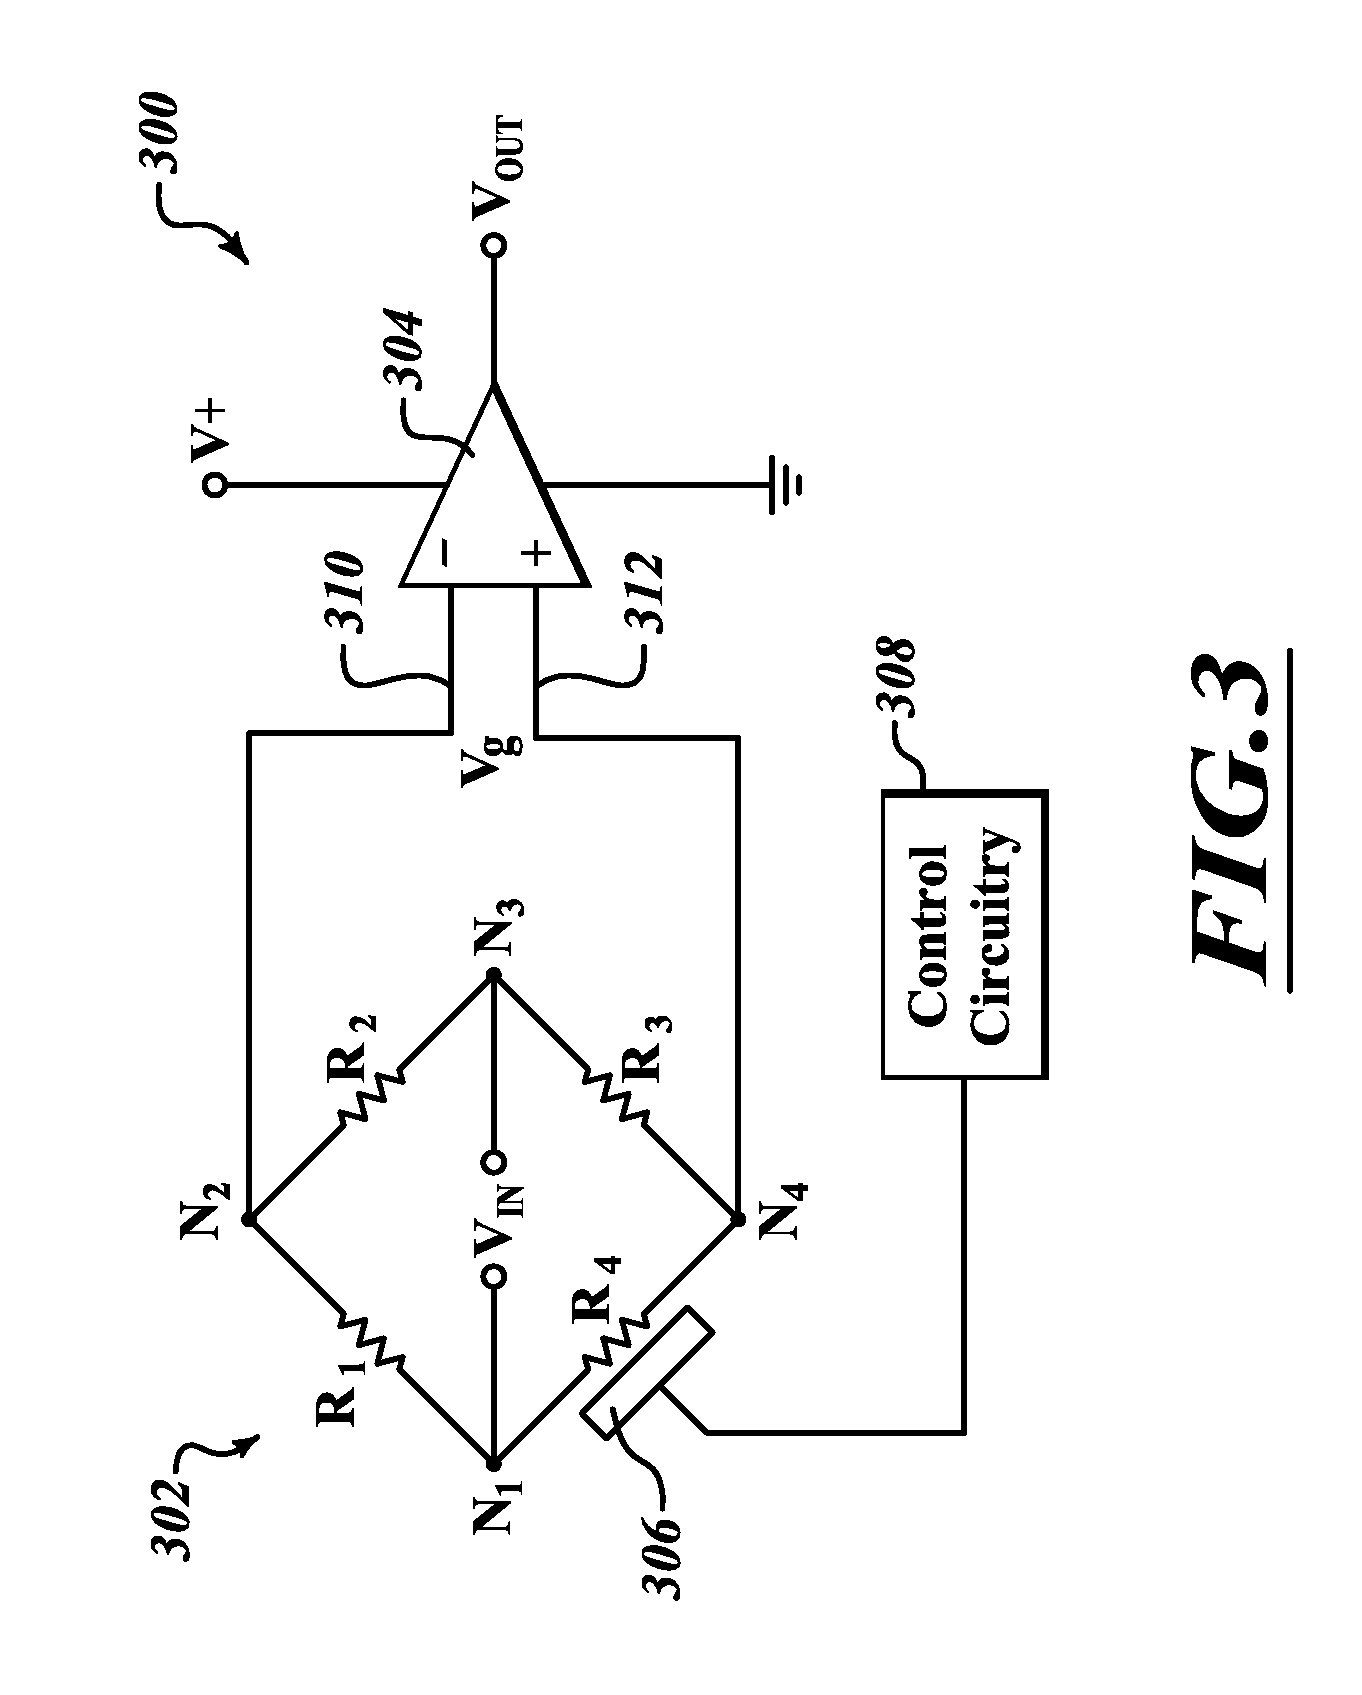 Temperature switch with resistive sensor